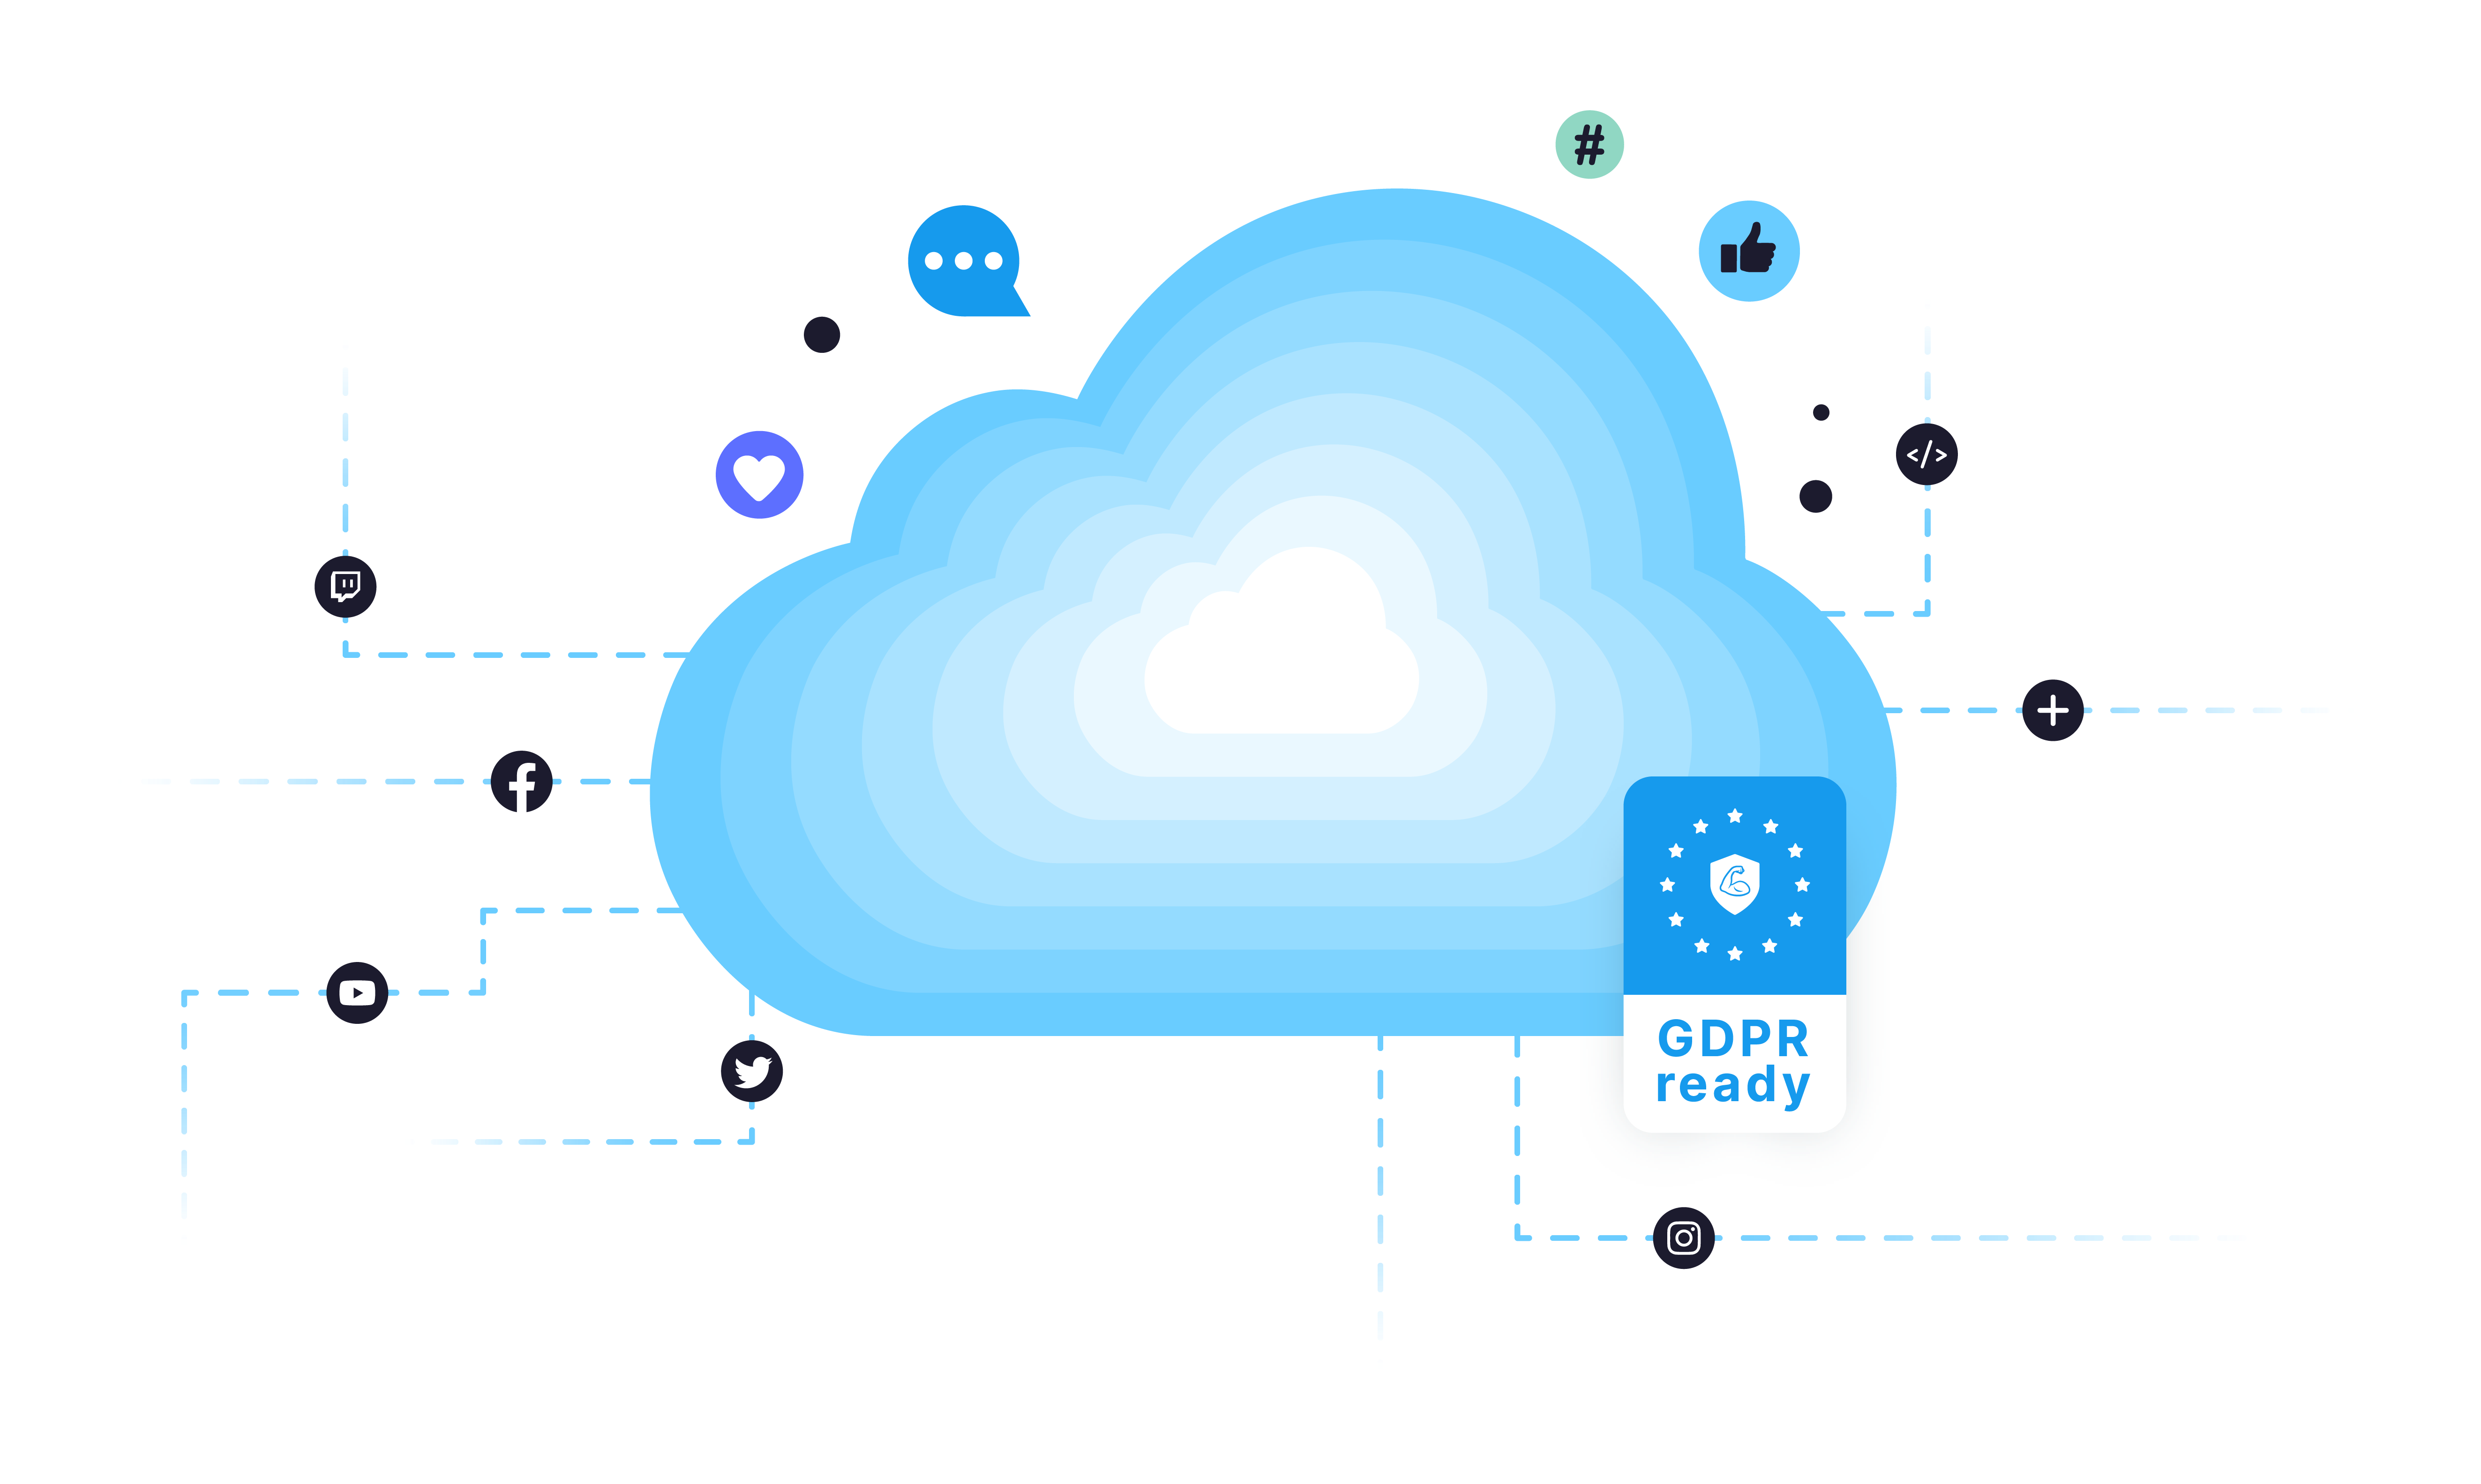 "RGPD compliance and efficient infrastructure  Blue cloud with social networks icons and GDPR security "